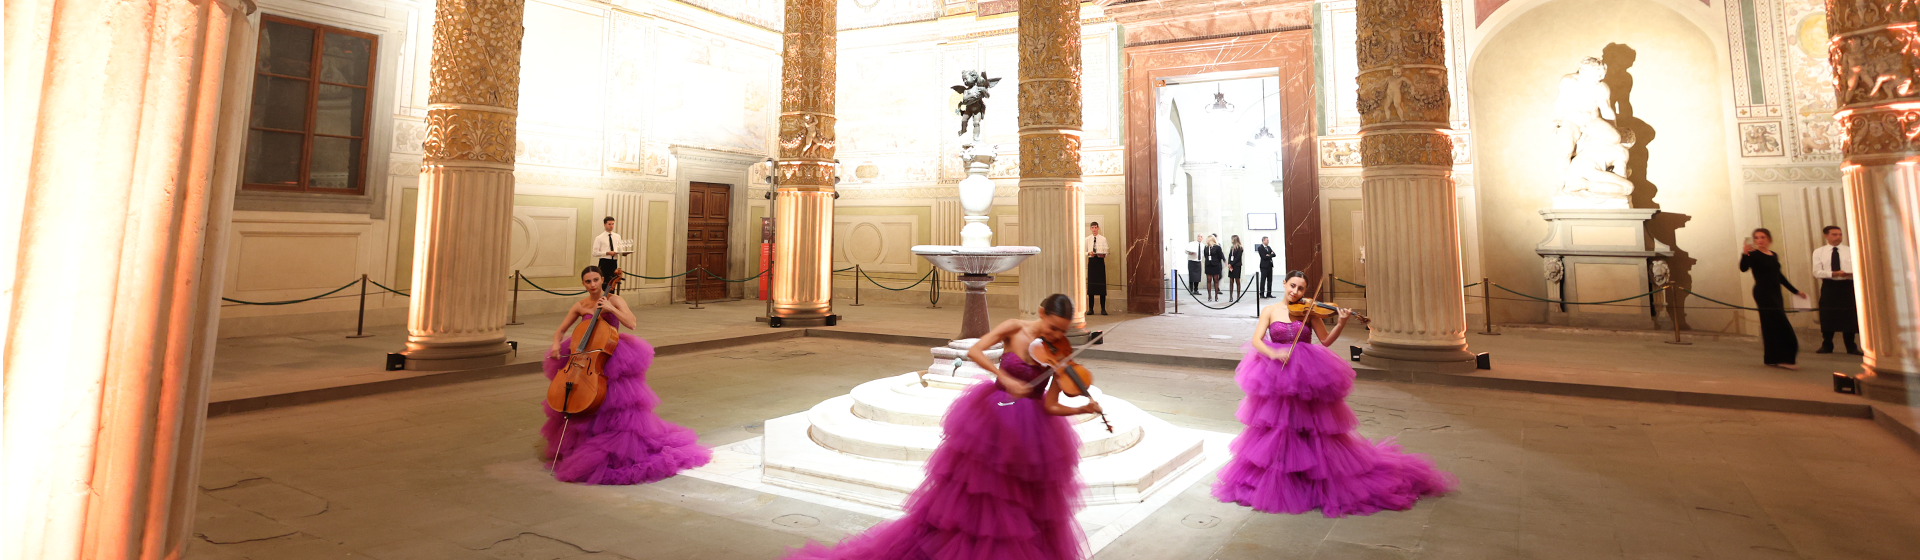 People in pink ball gowns play string instruments in a grand foyer